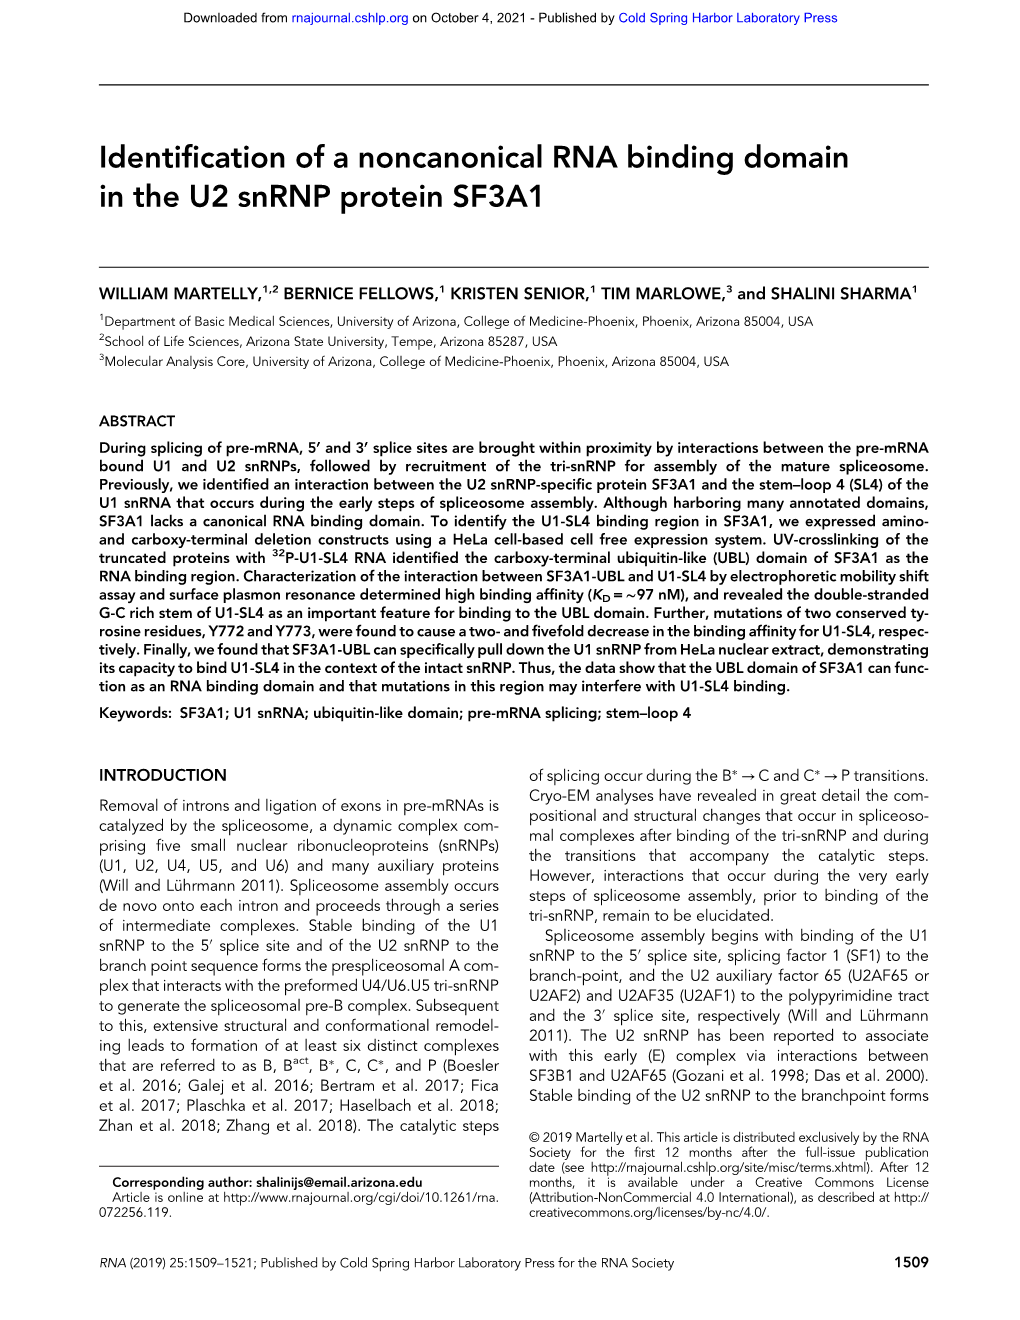 Identification of a Noncanonical RNA Binding Domain in the U2 Snrnp Protein SF3A1